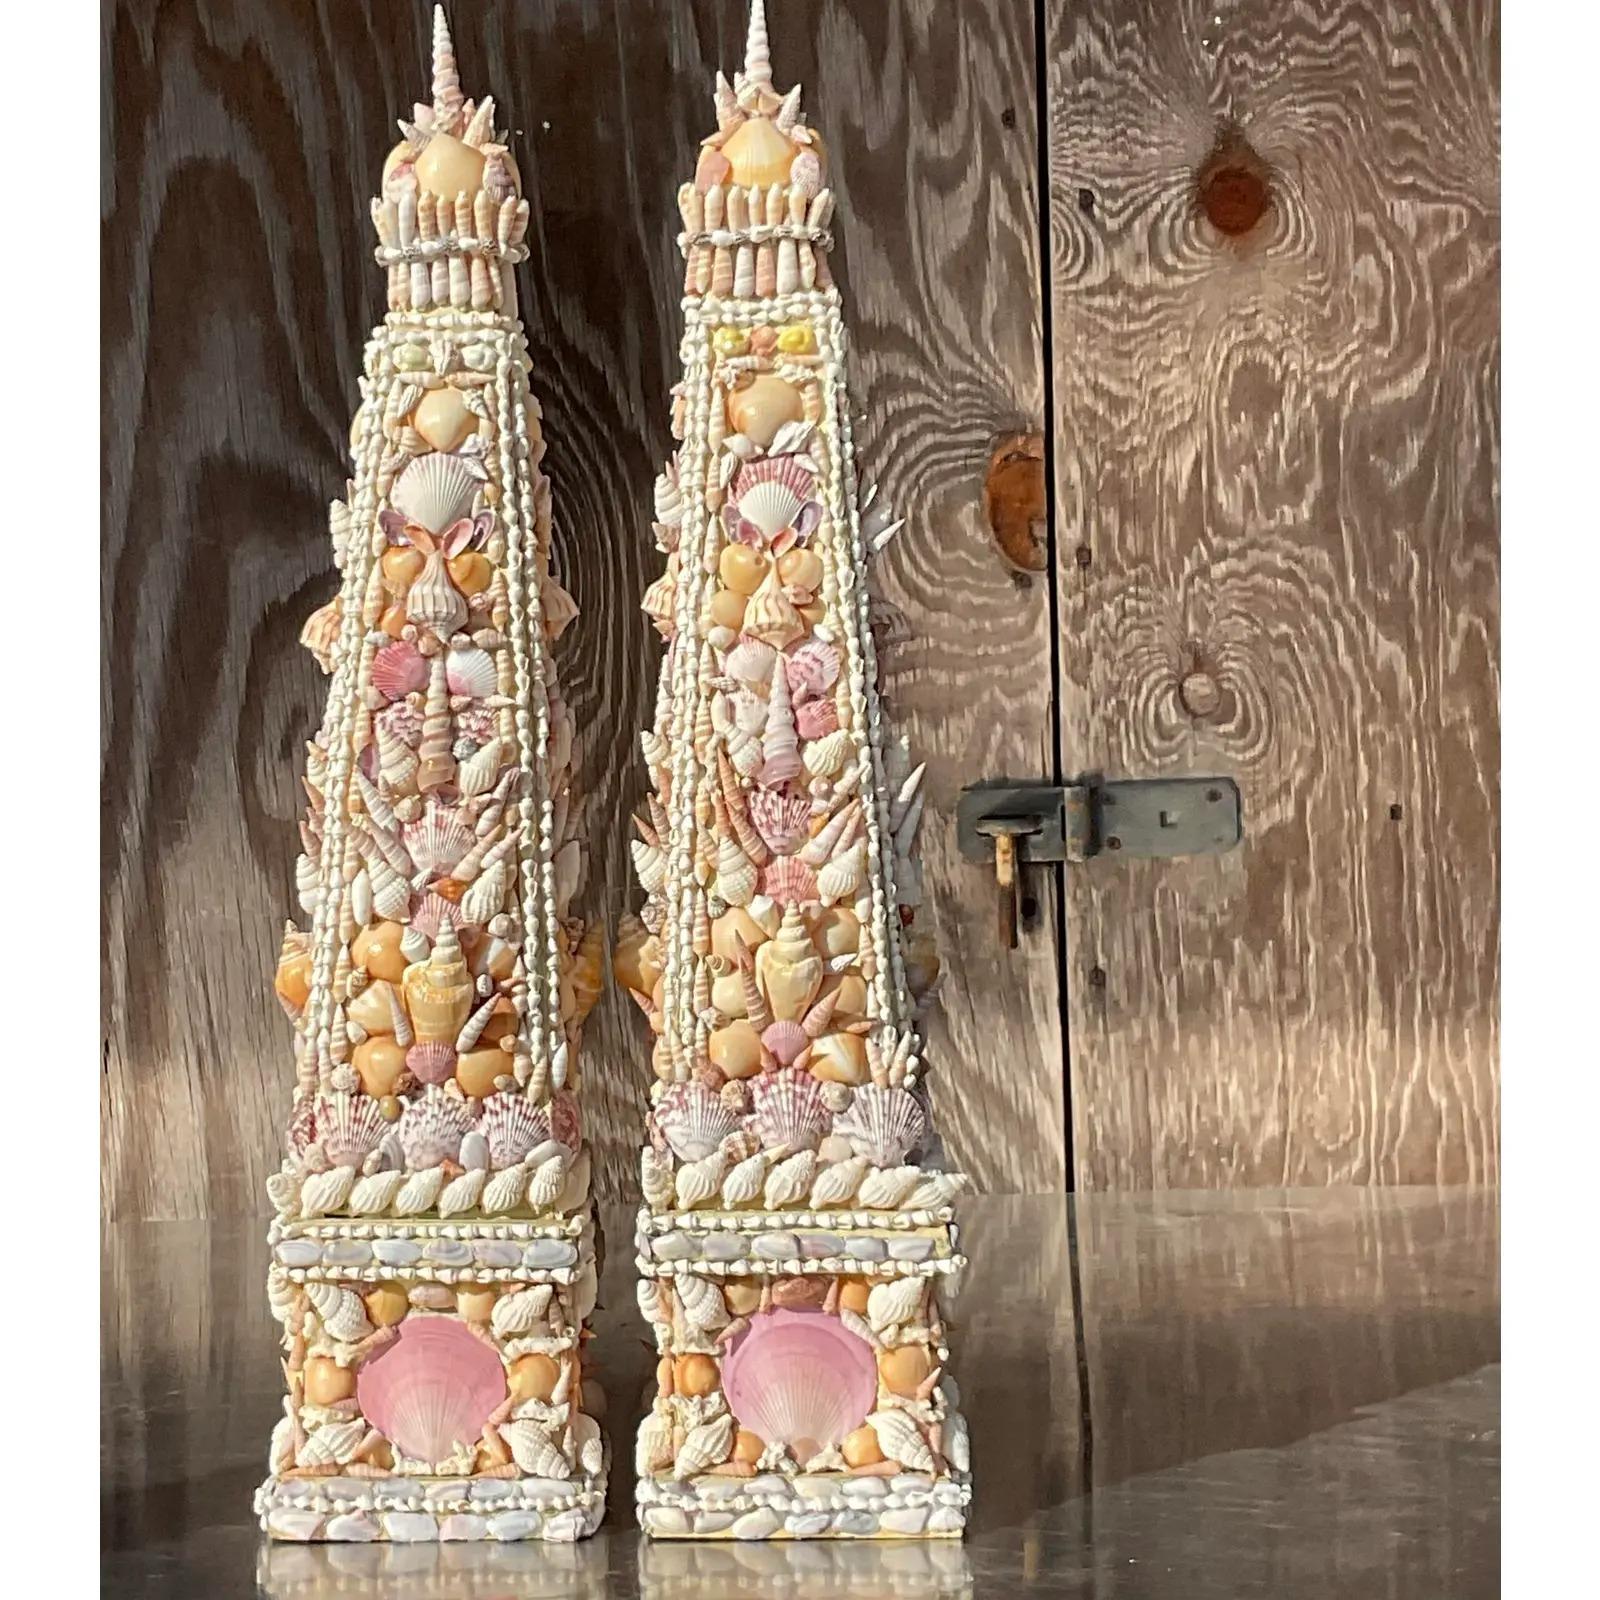 A stunning pair of vintage Coastal shell obelisks. Beautiful hand placed shells on a vintage set of wooden obelisks. Beautiful scale and coloration. Acquired from a Palm Beach estate.